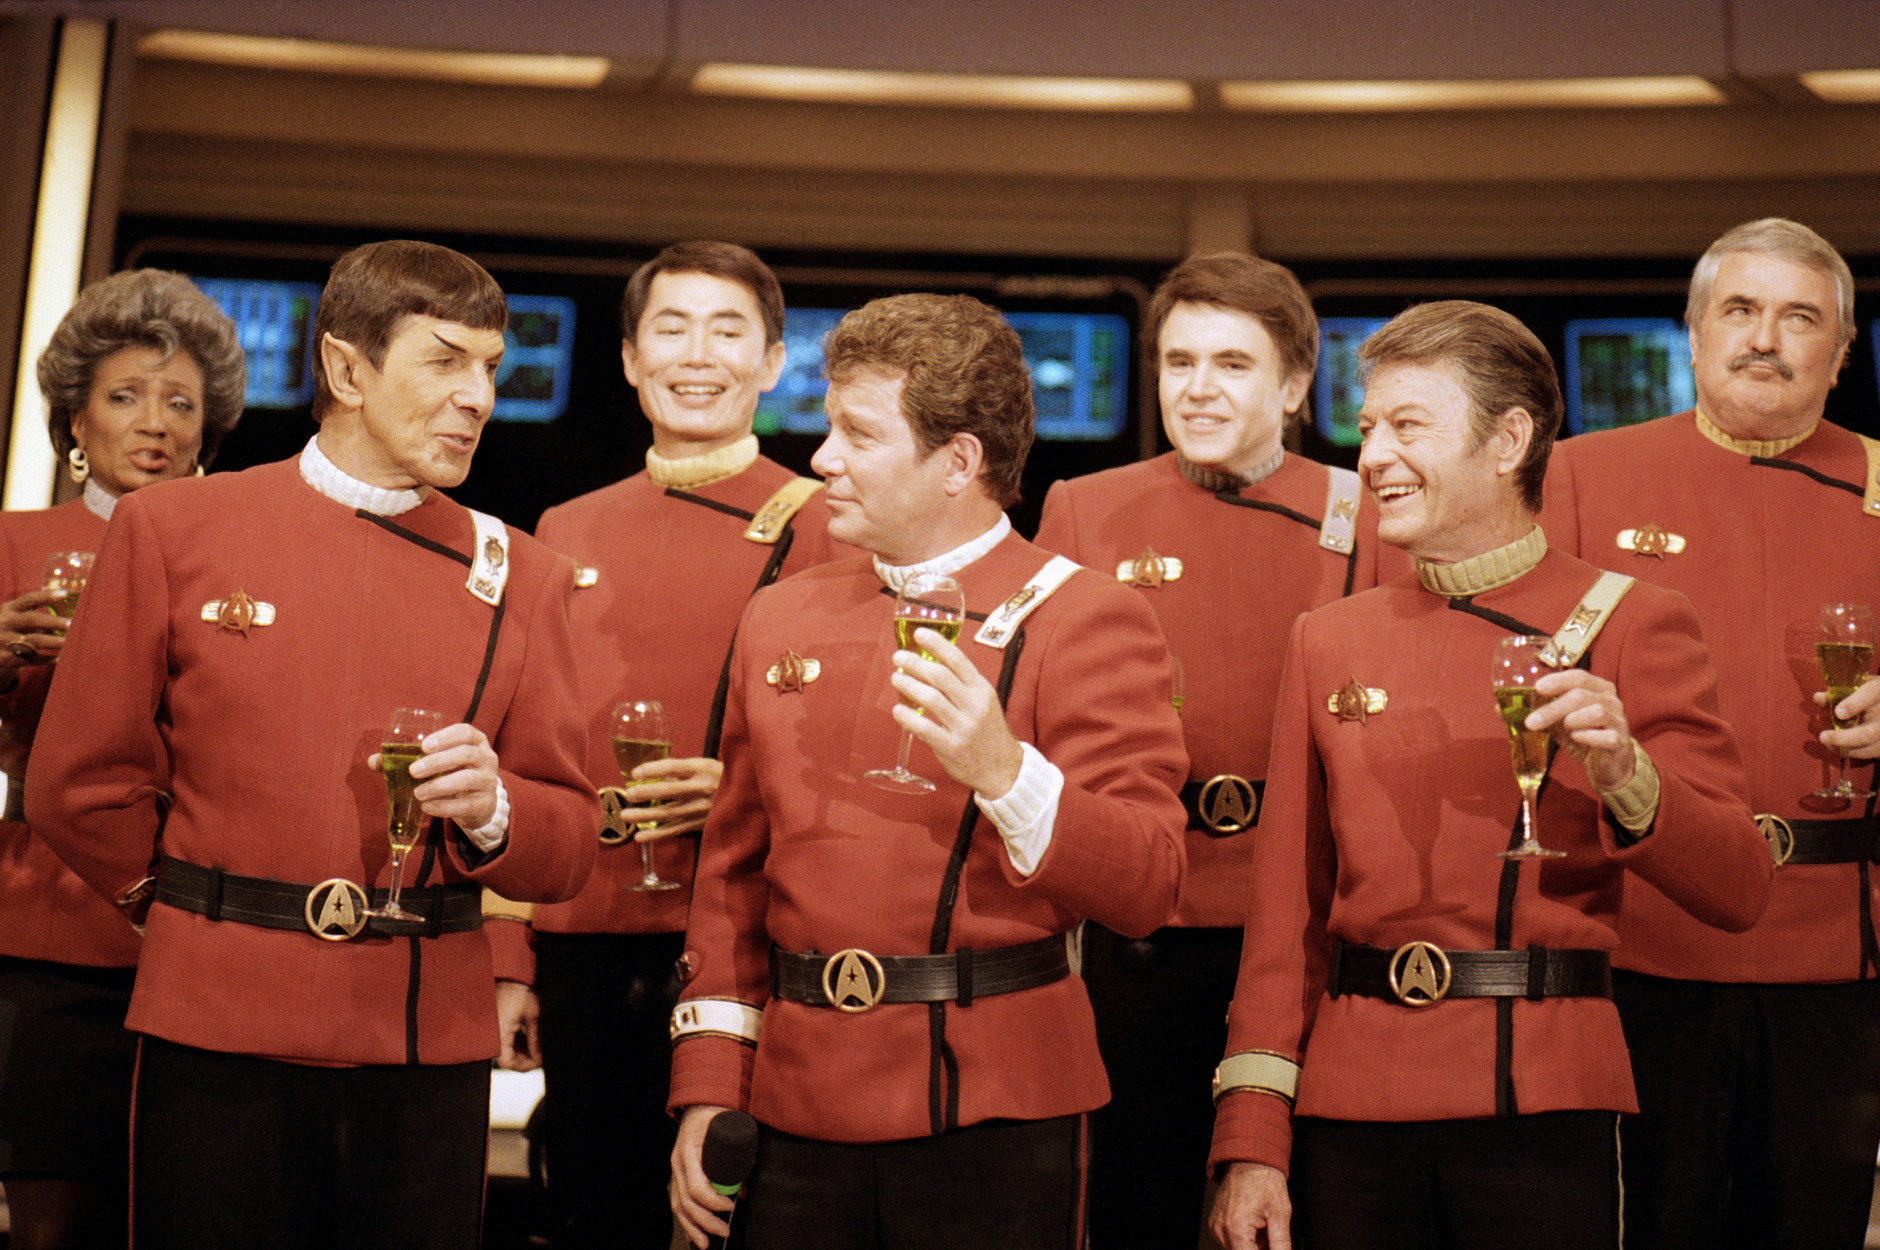 Members of the "Star Trek" crew, from right in front: DeForest Kelley, William Shanter and Leonard Nimoy, and back row from right: James Doohan, Walter Koenig, George Takei and Nichelle Nichols, toast the newest "Trek" film--in which Shanter makes his directorial debut--"Star Trek V: The Final Frontier," during a news conference Dec. 28, 1988 at Paramount Studios to announce the latest voyage. (AP Photo/Bob Galbraith)